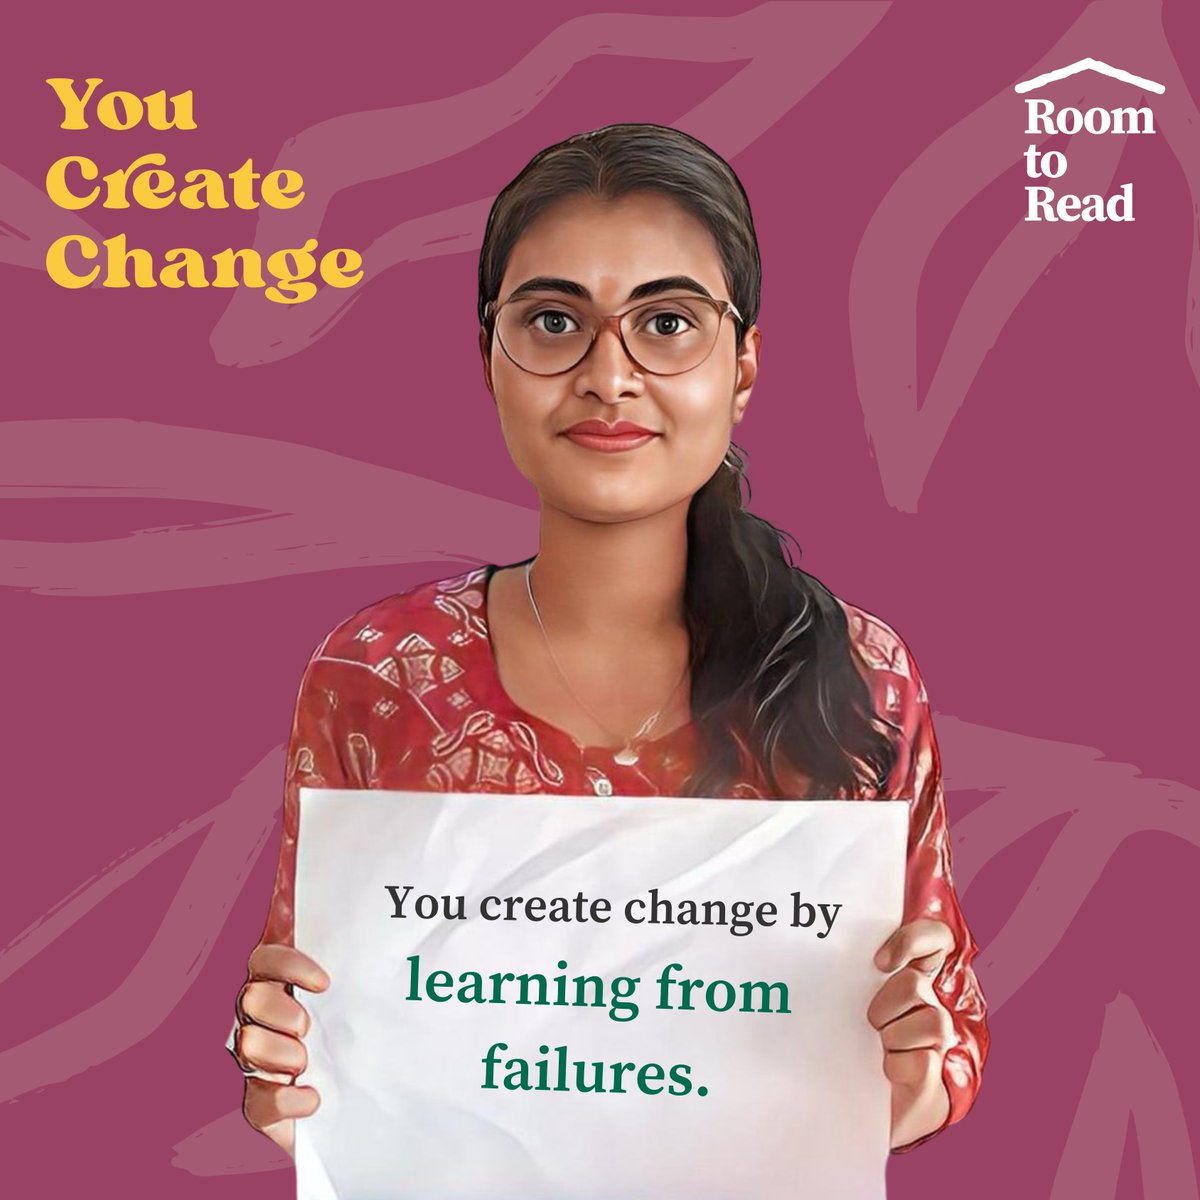 We are creating change through the power of #lifeskills. What's your secret as you create change? 
Join us and embrace your change journey. Tag us and use #YouCreateChange to share your story. 
#InternationalWomensDay #IWD #IWD2024 #YouCreateChange #CreateChange #WomenEmpowerment